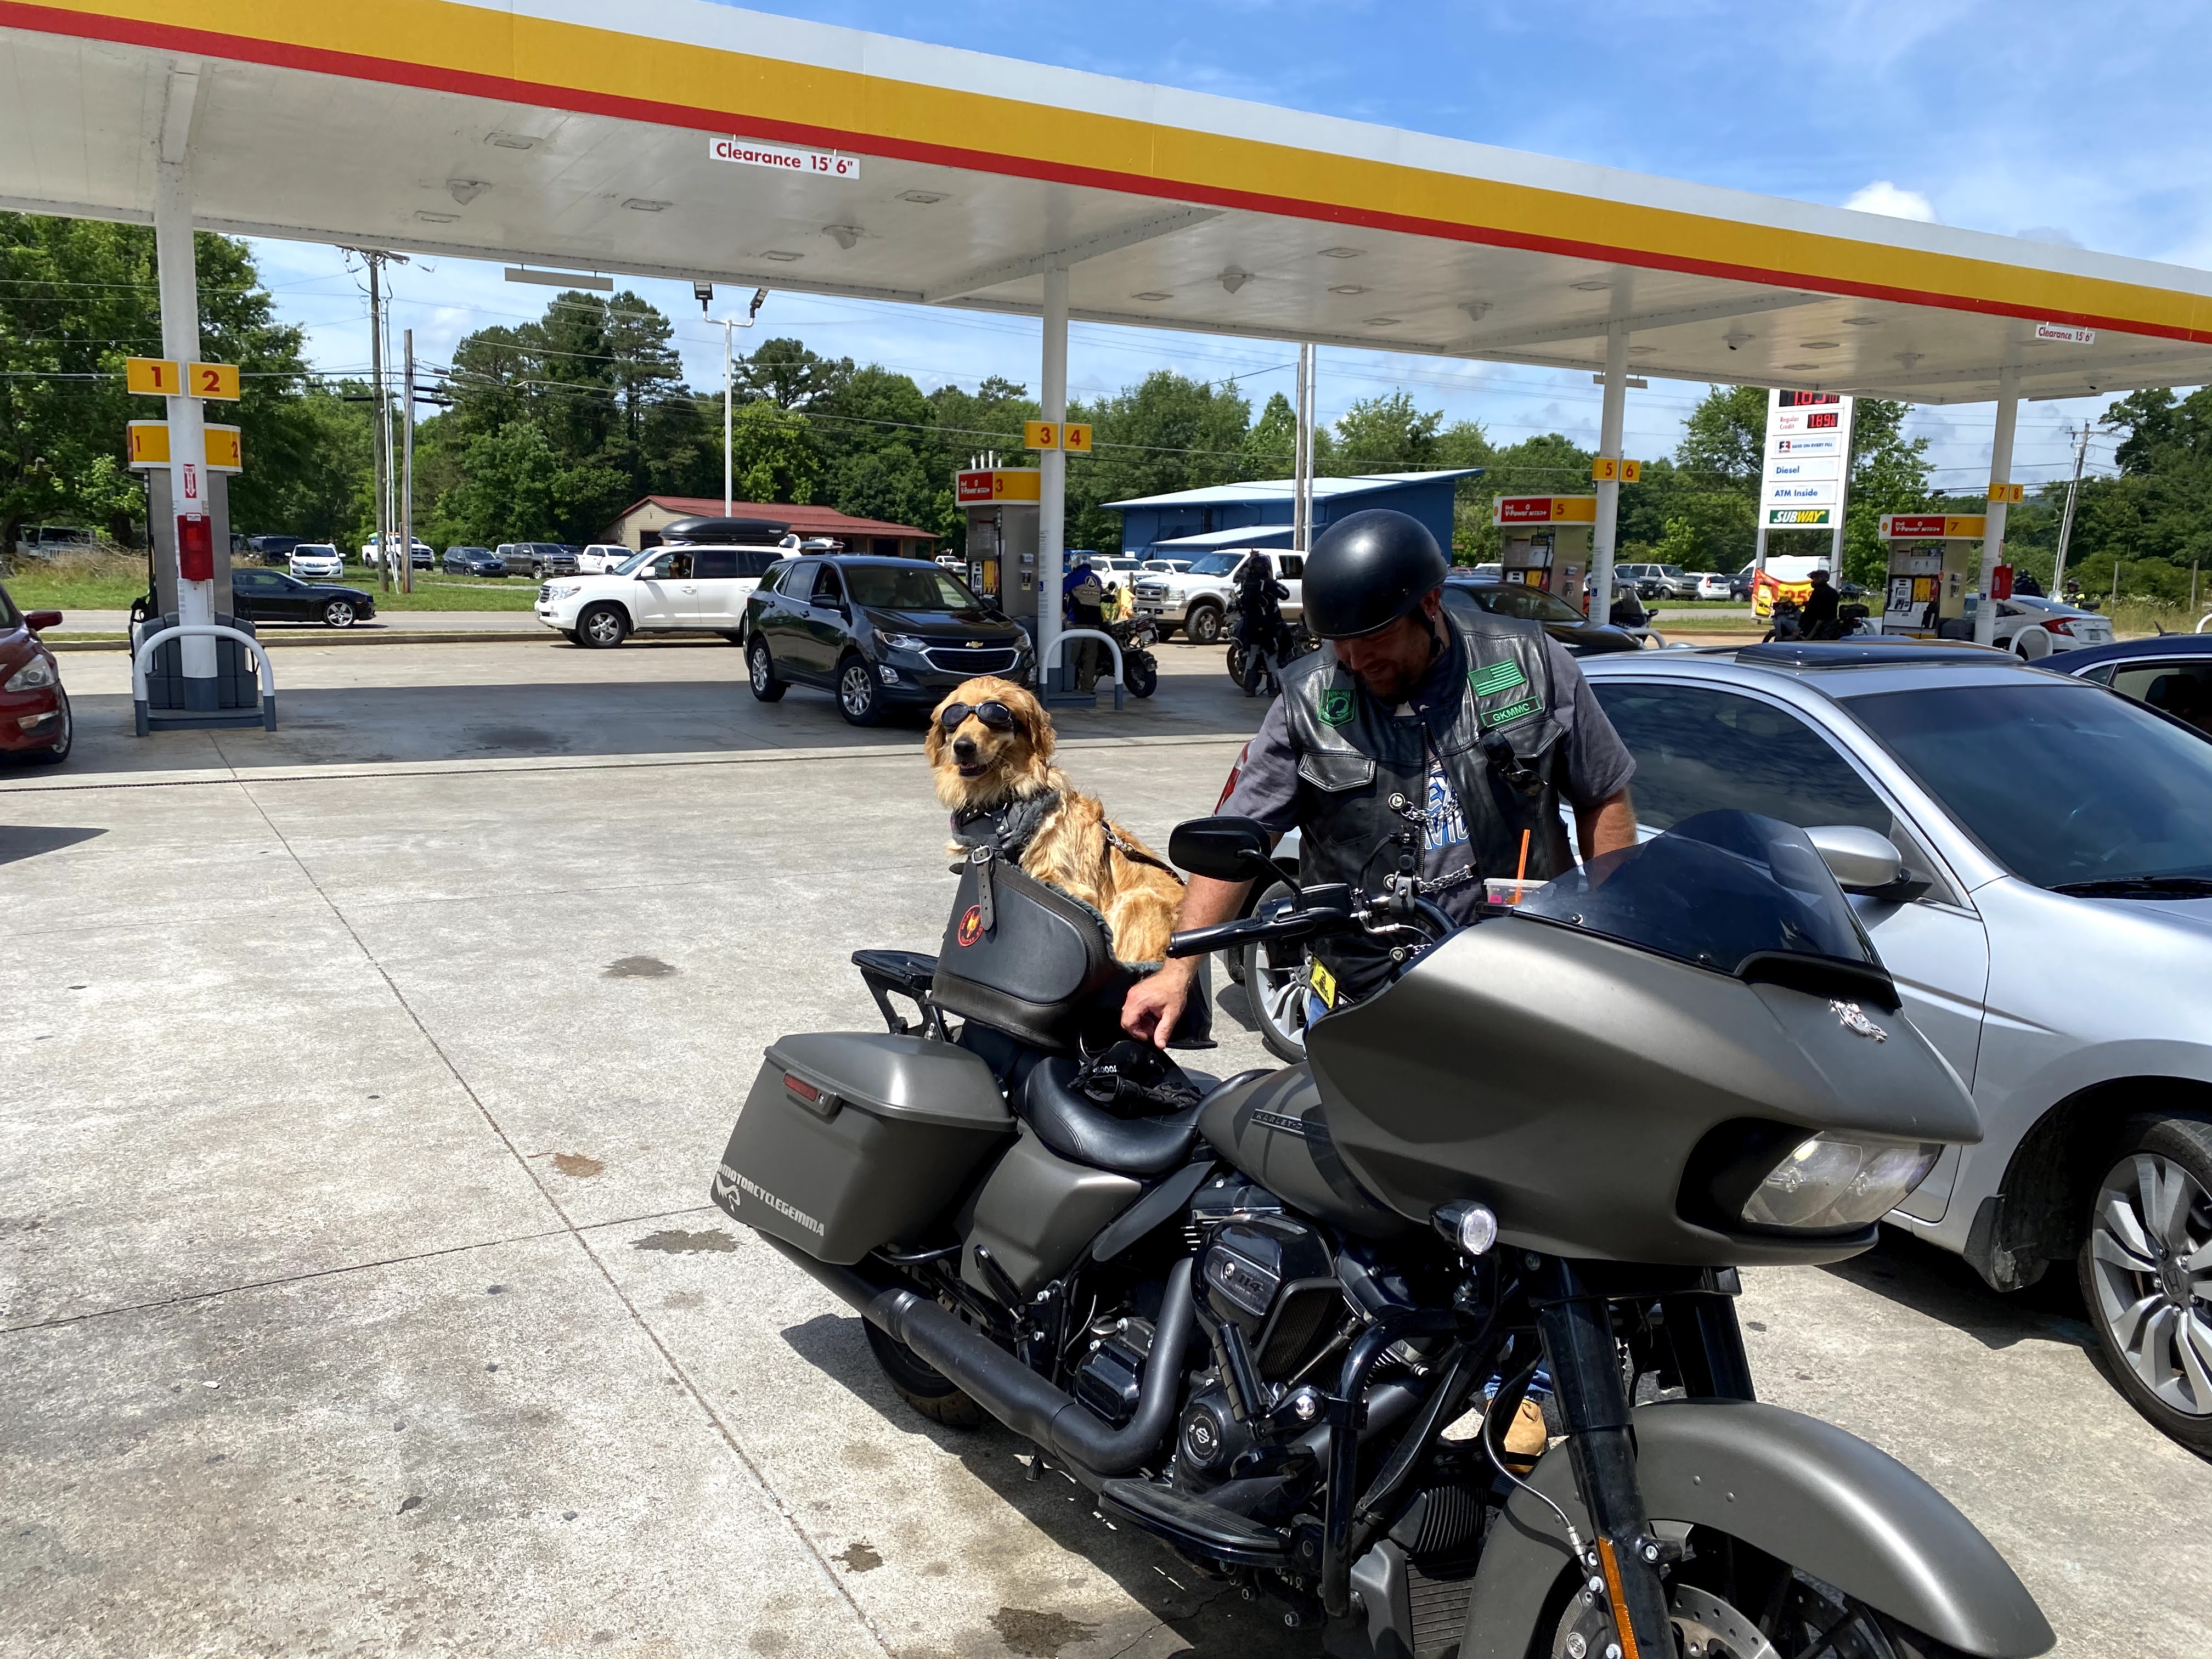 Cool Dog on a Motorcycle with Shades